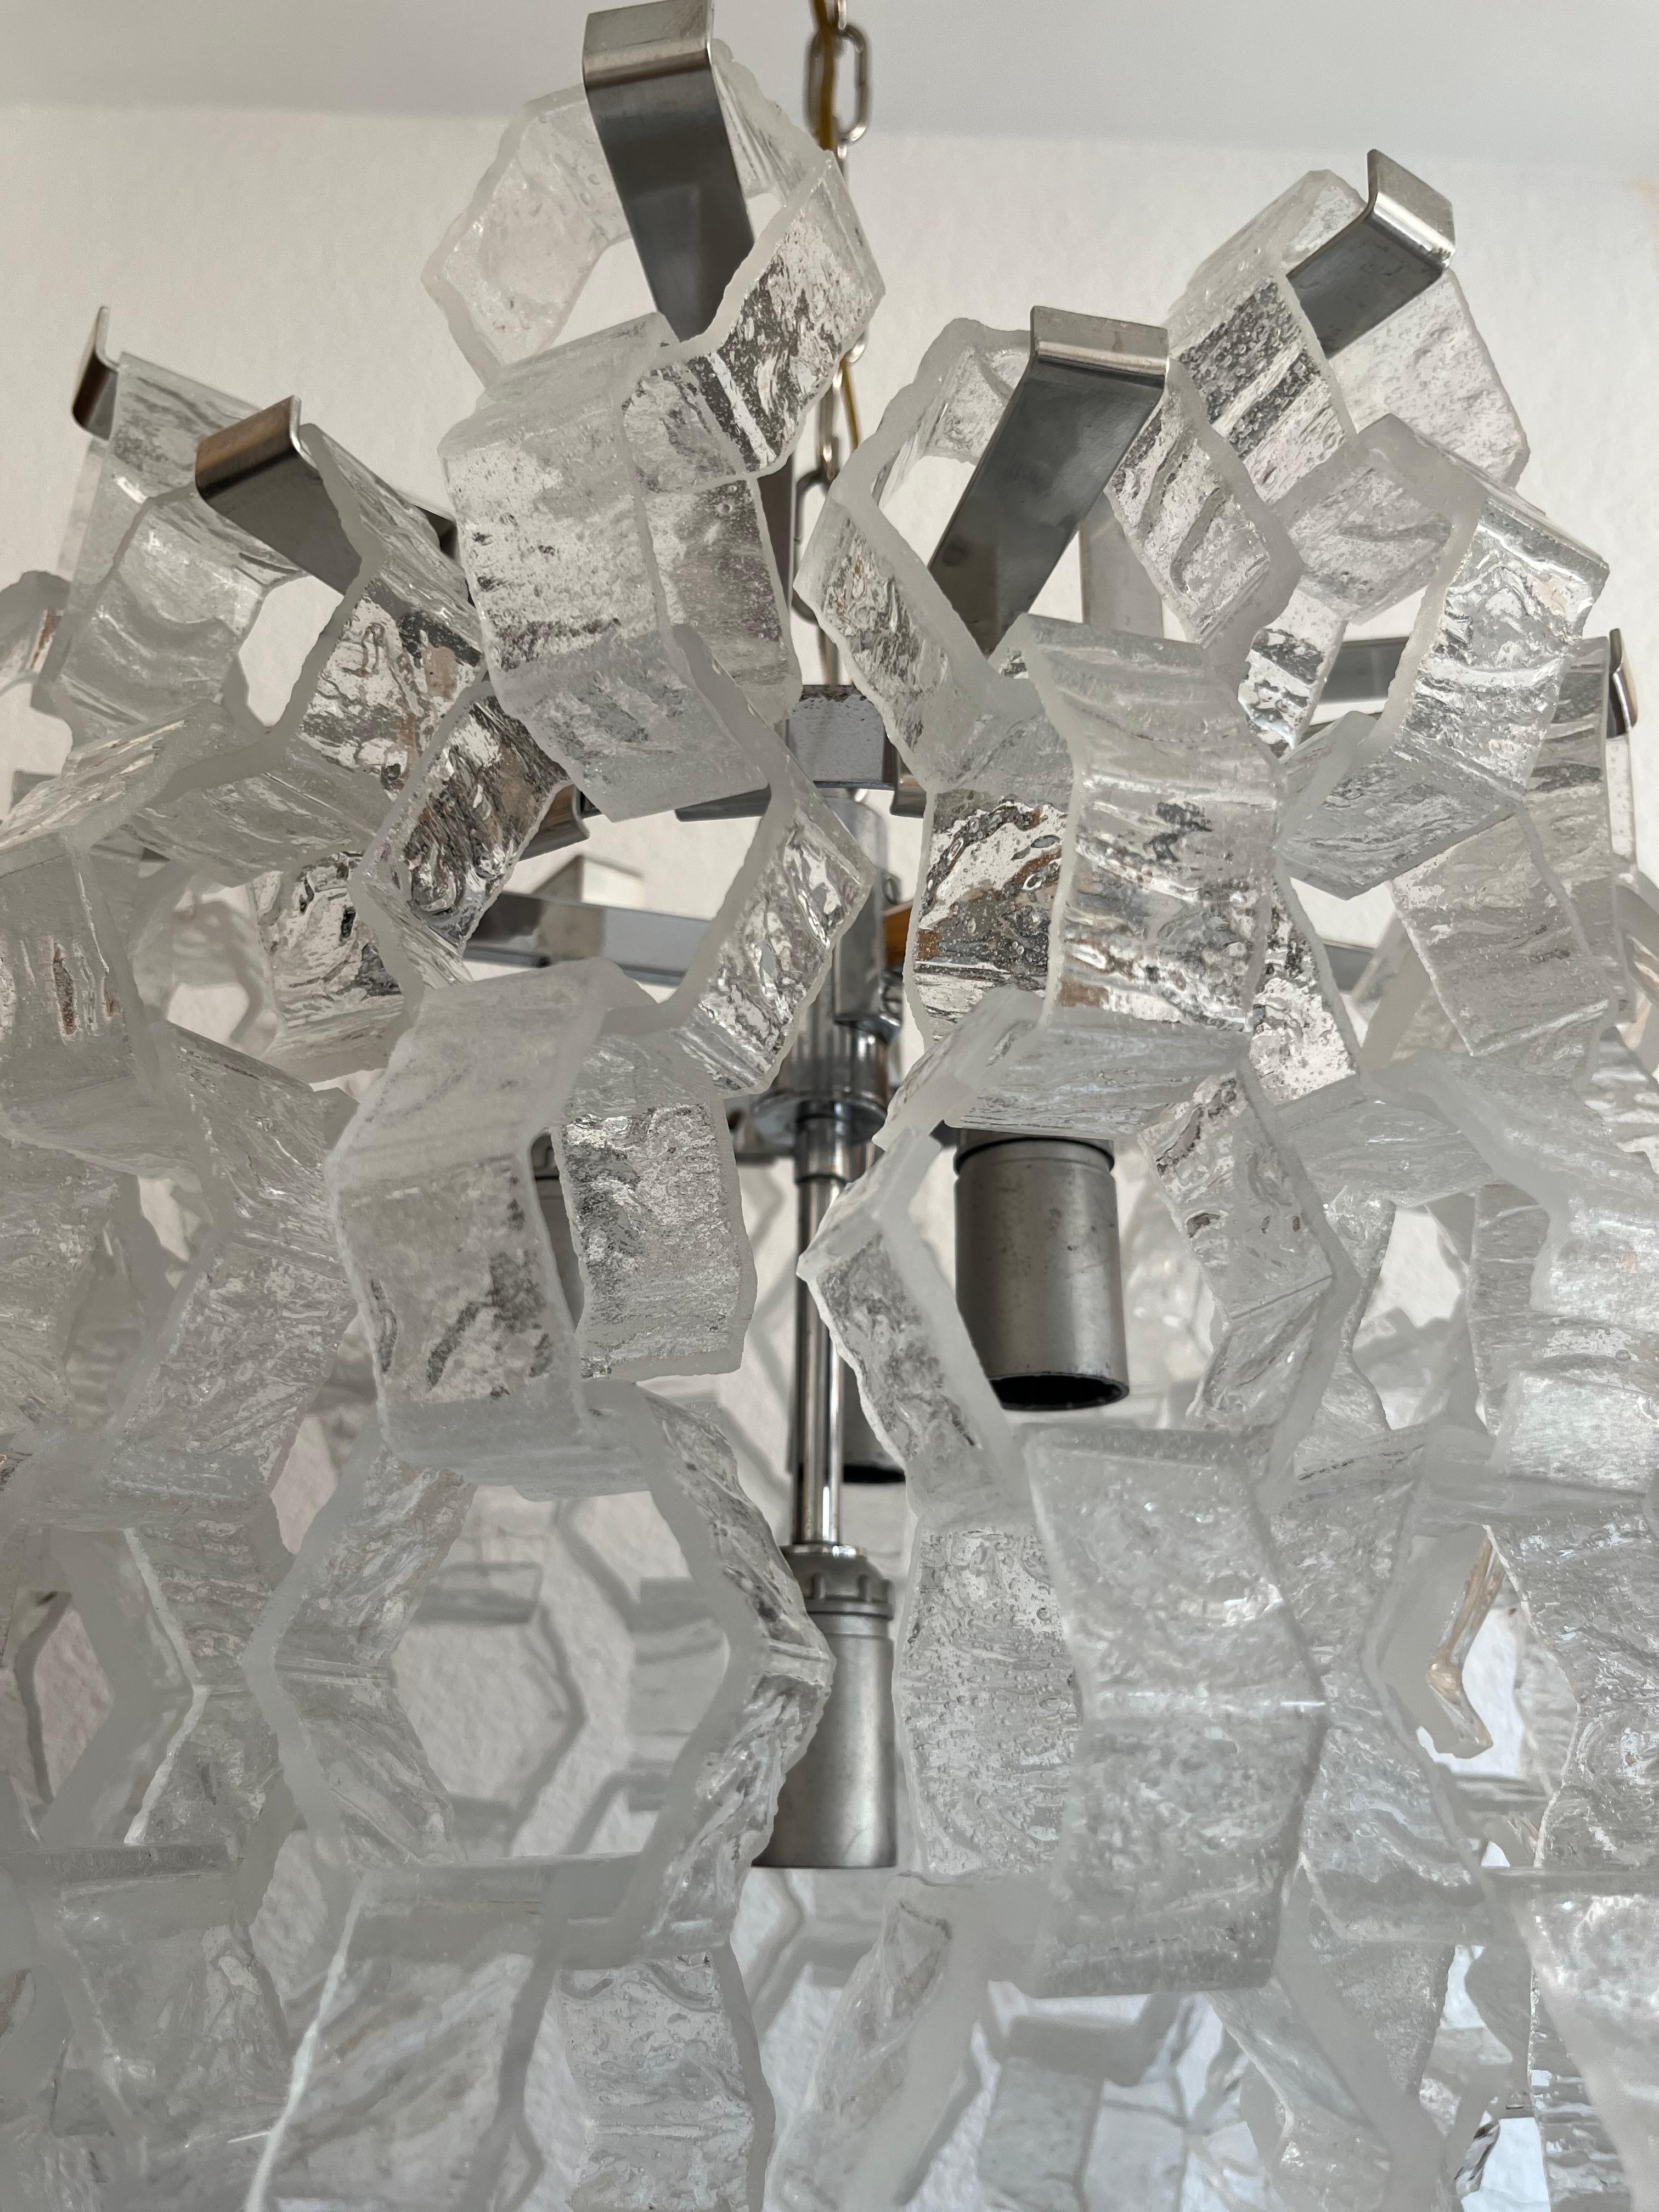 Unique and marvellous Italian Murano glass midcentury chandelier. This chandelier was made during the 1970s in Italy.
This chandelier is composed by 152 units of clear hexagon Murano glasses and metal structure. We include 2 more glasses as